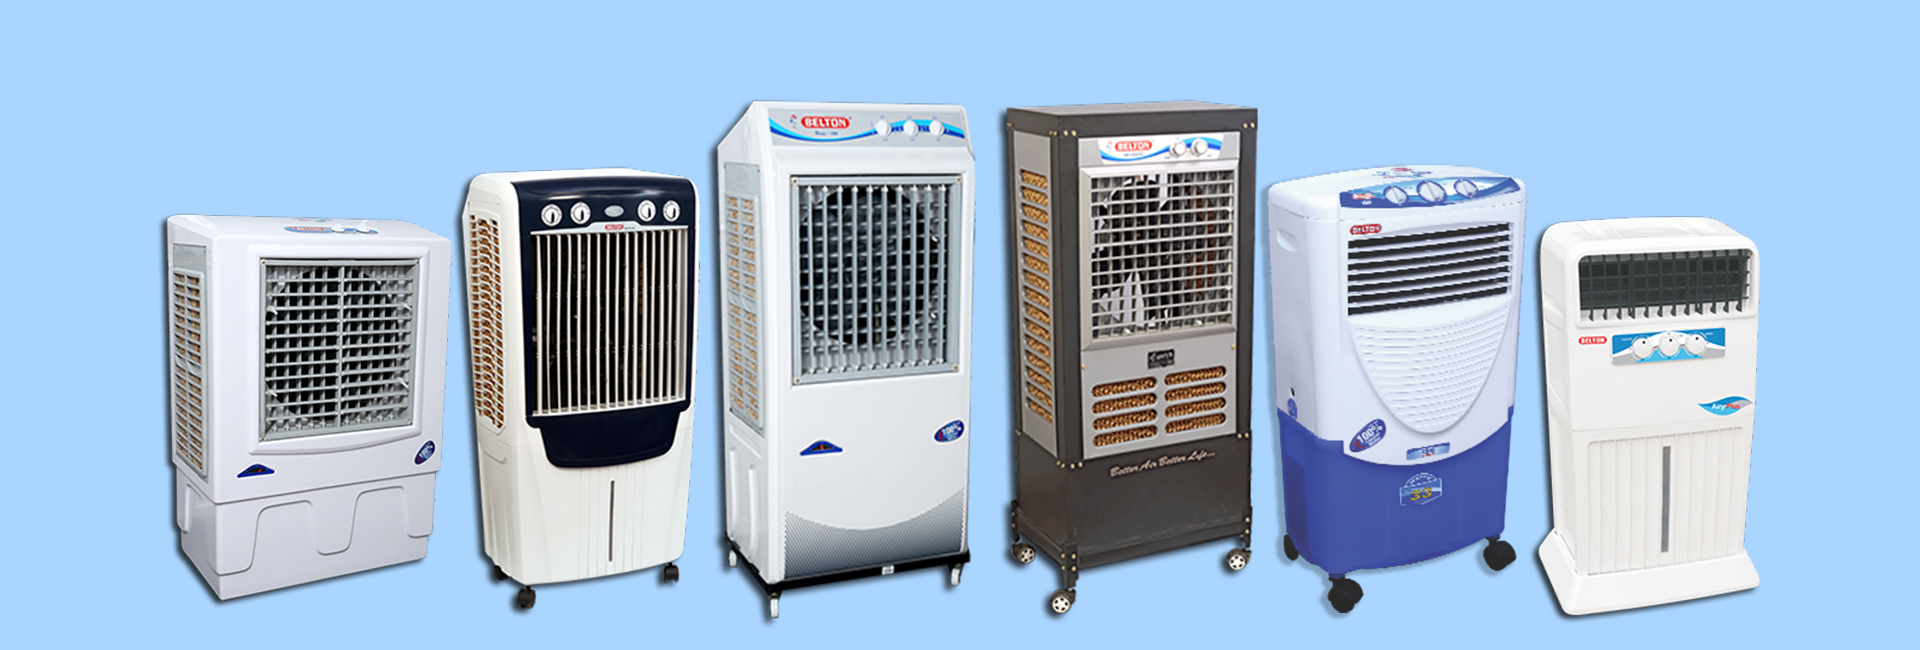 As one of the Top 10 Personal Coolers Manufacturer in India, Belton offers Metal Coolers with power cooling capabilities.